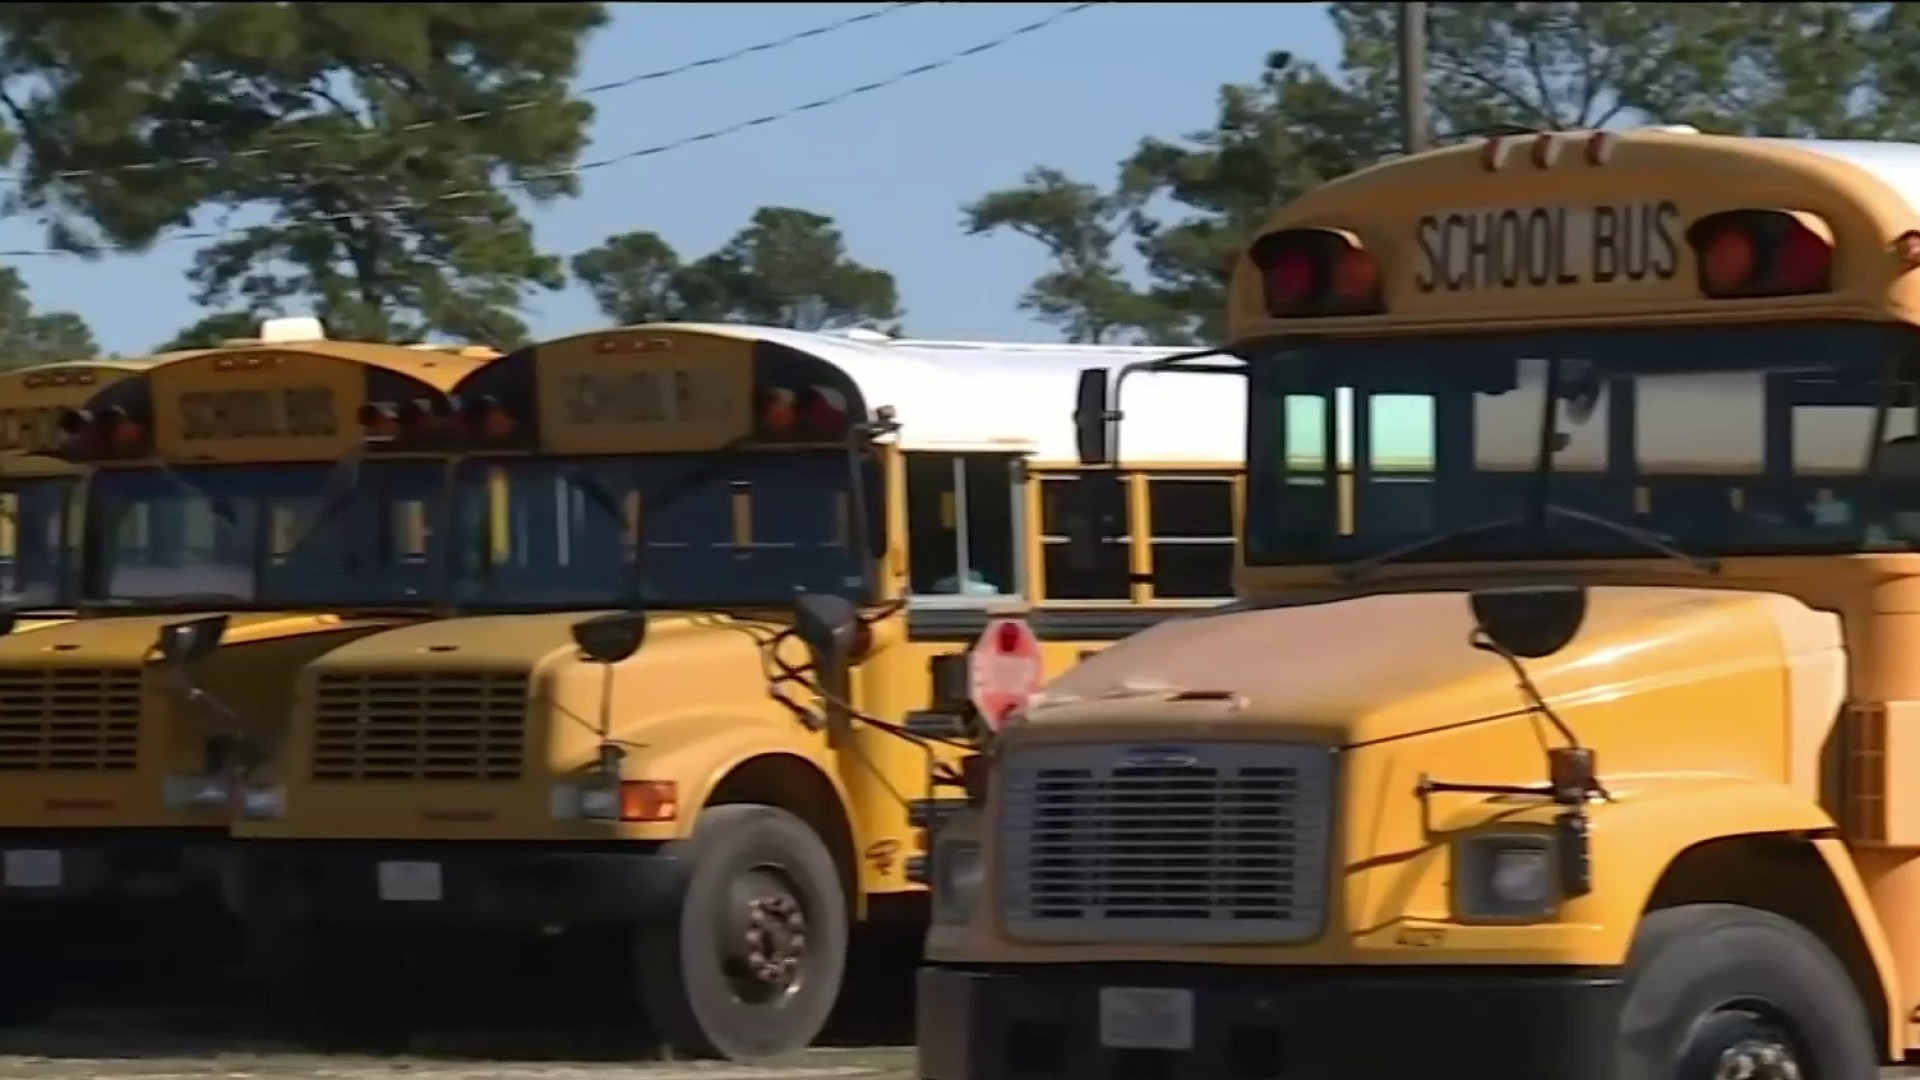 School Bus Driver - Magnolia ISD parents outraged after middle school students airdropped  'inappropriate' content while on school bus